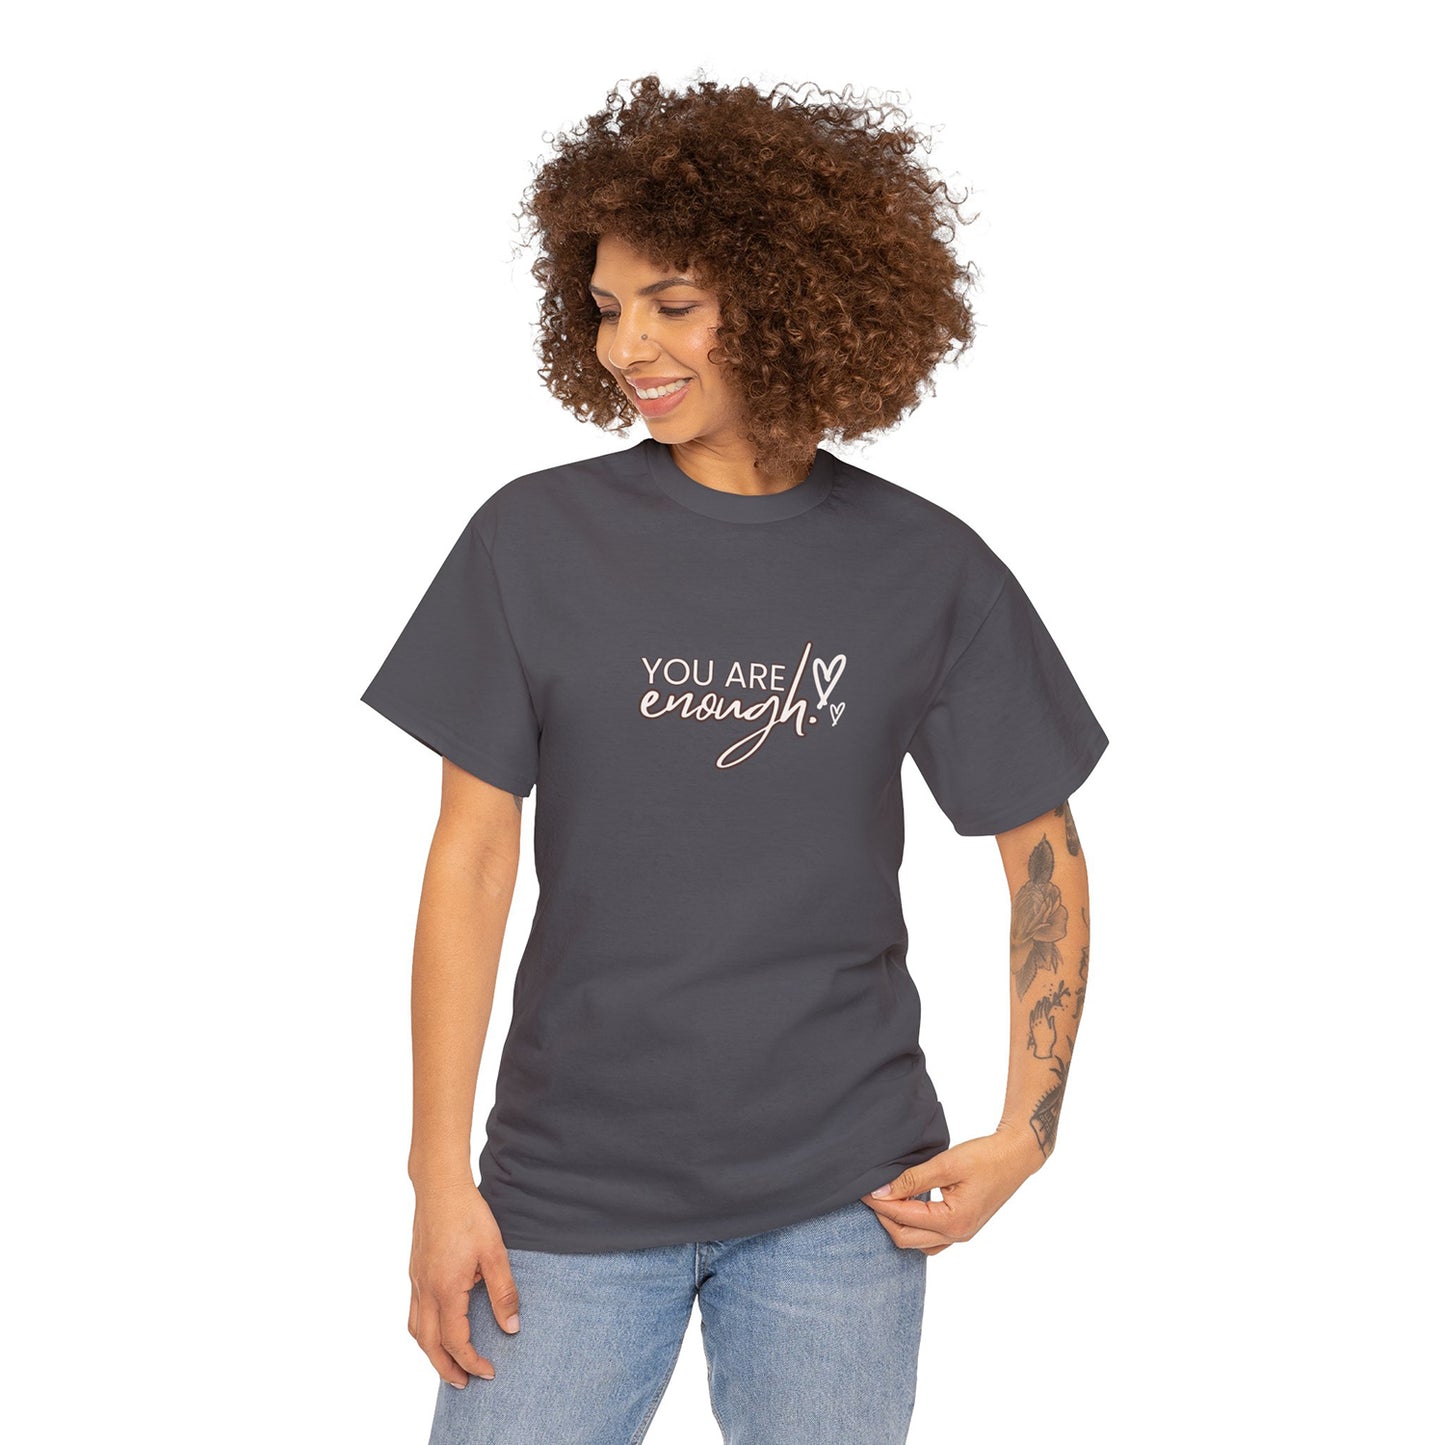 women's T shirt with Unique printing design